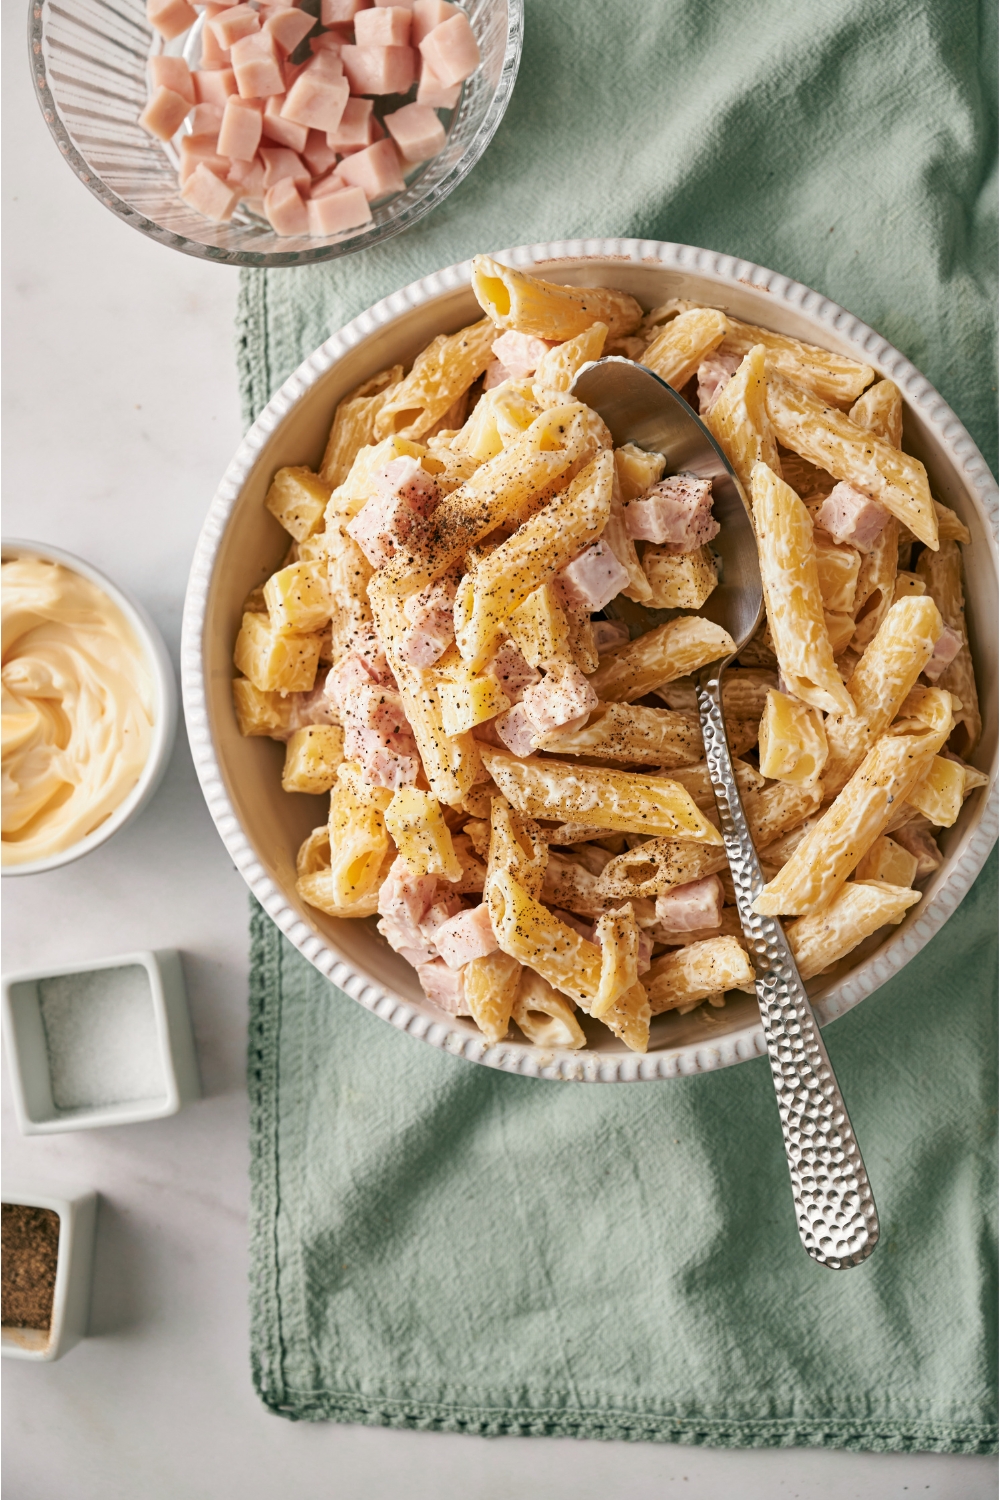 A white bowl filled with pasta salad, with penne pasta, cubed ham, cubed cheese, and black pepper, all tossed in a creamy dressing using a spoon in the bowl.